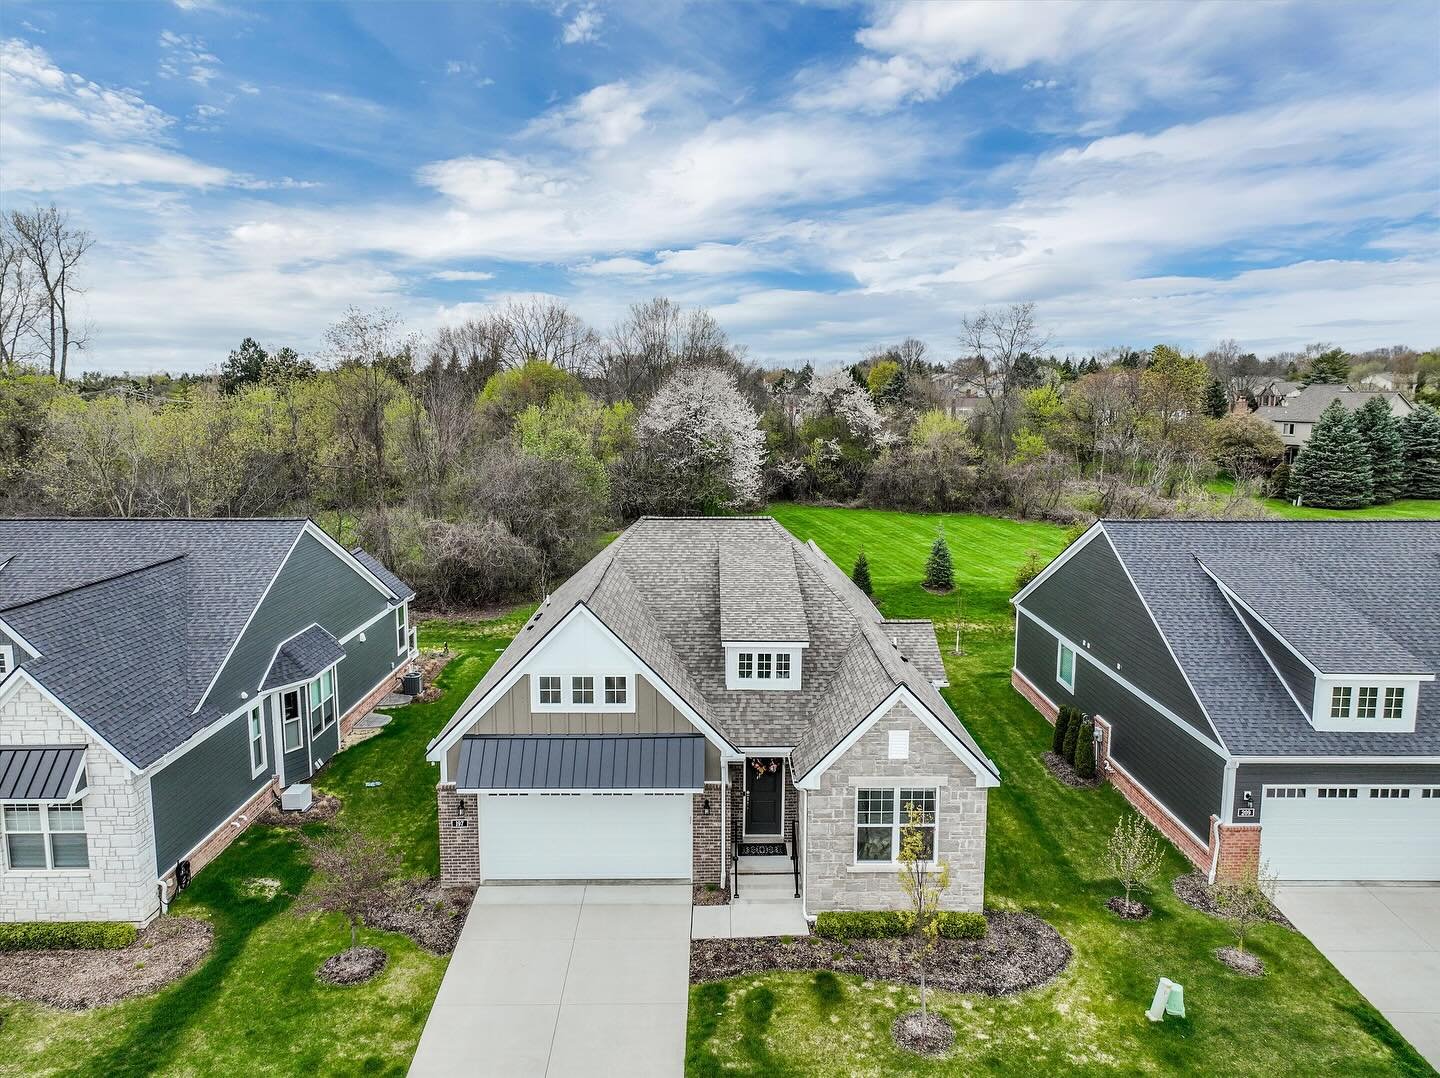 Heyyyy📍 Rochester Hills buyers | Totally move in ready, nearly NEW construction RANCH 🦄 with 3 bedrooms and 3 full baths! Nearly 3000 square feet of finished living space throughout with a finished lower level. Premium lot backing to woods 🌲 offer